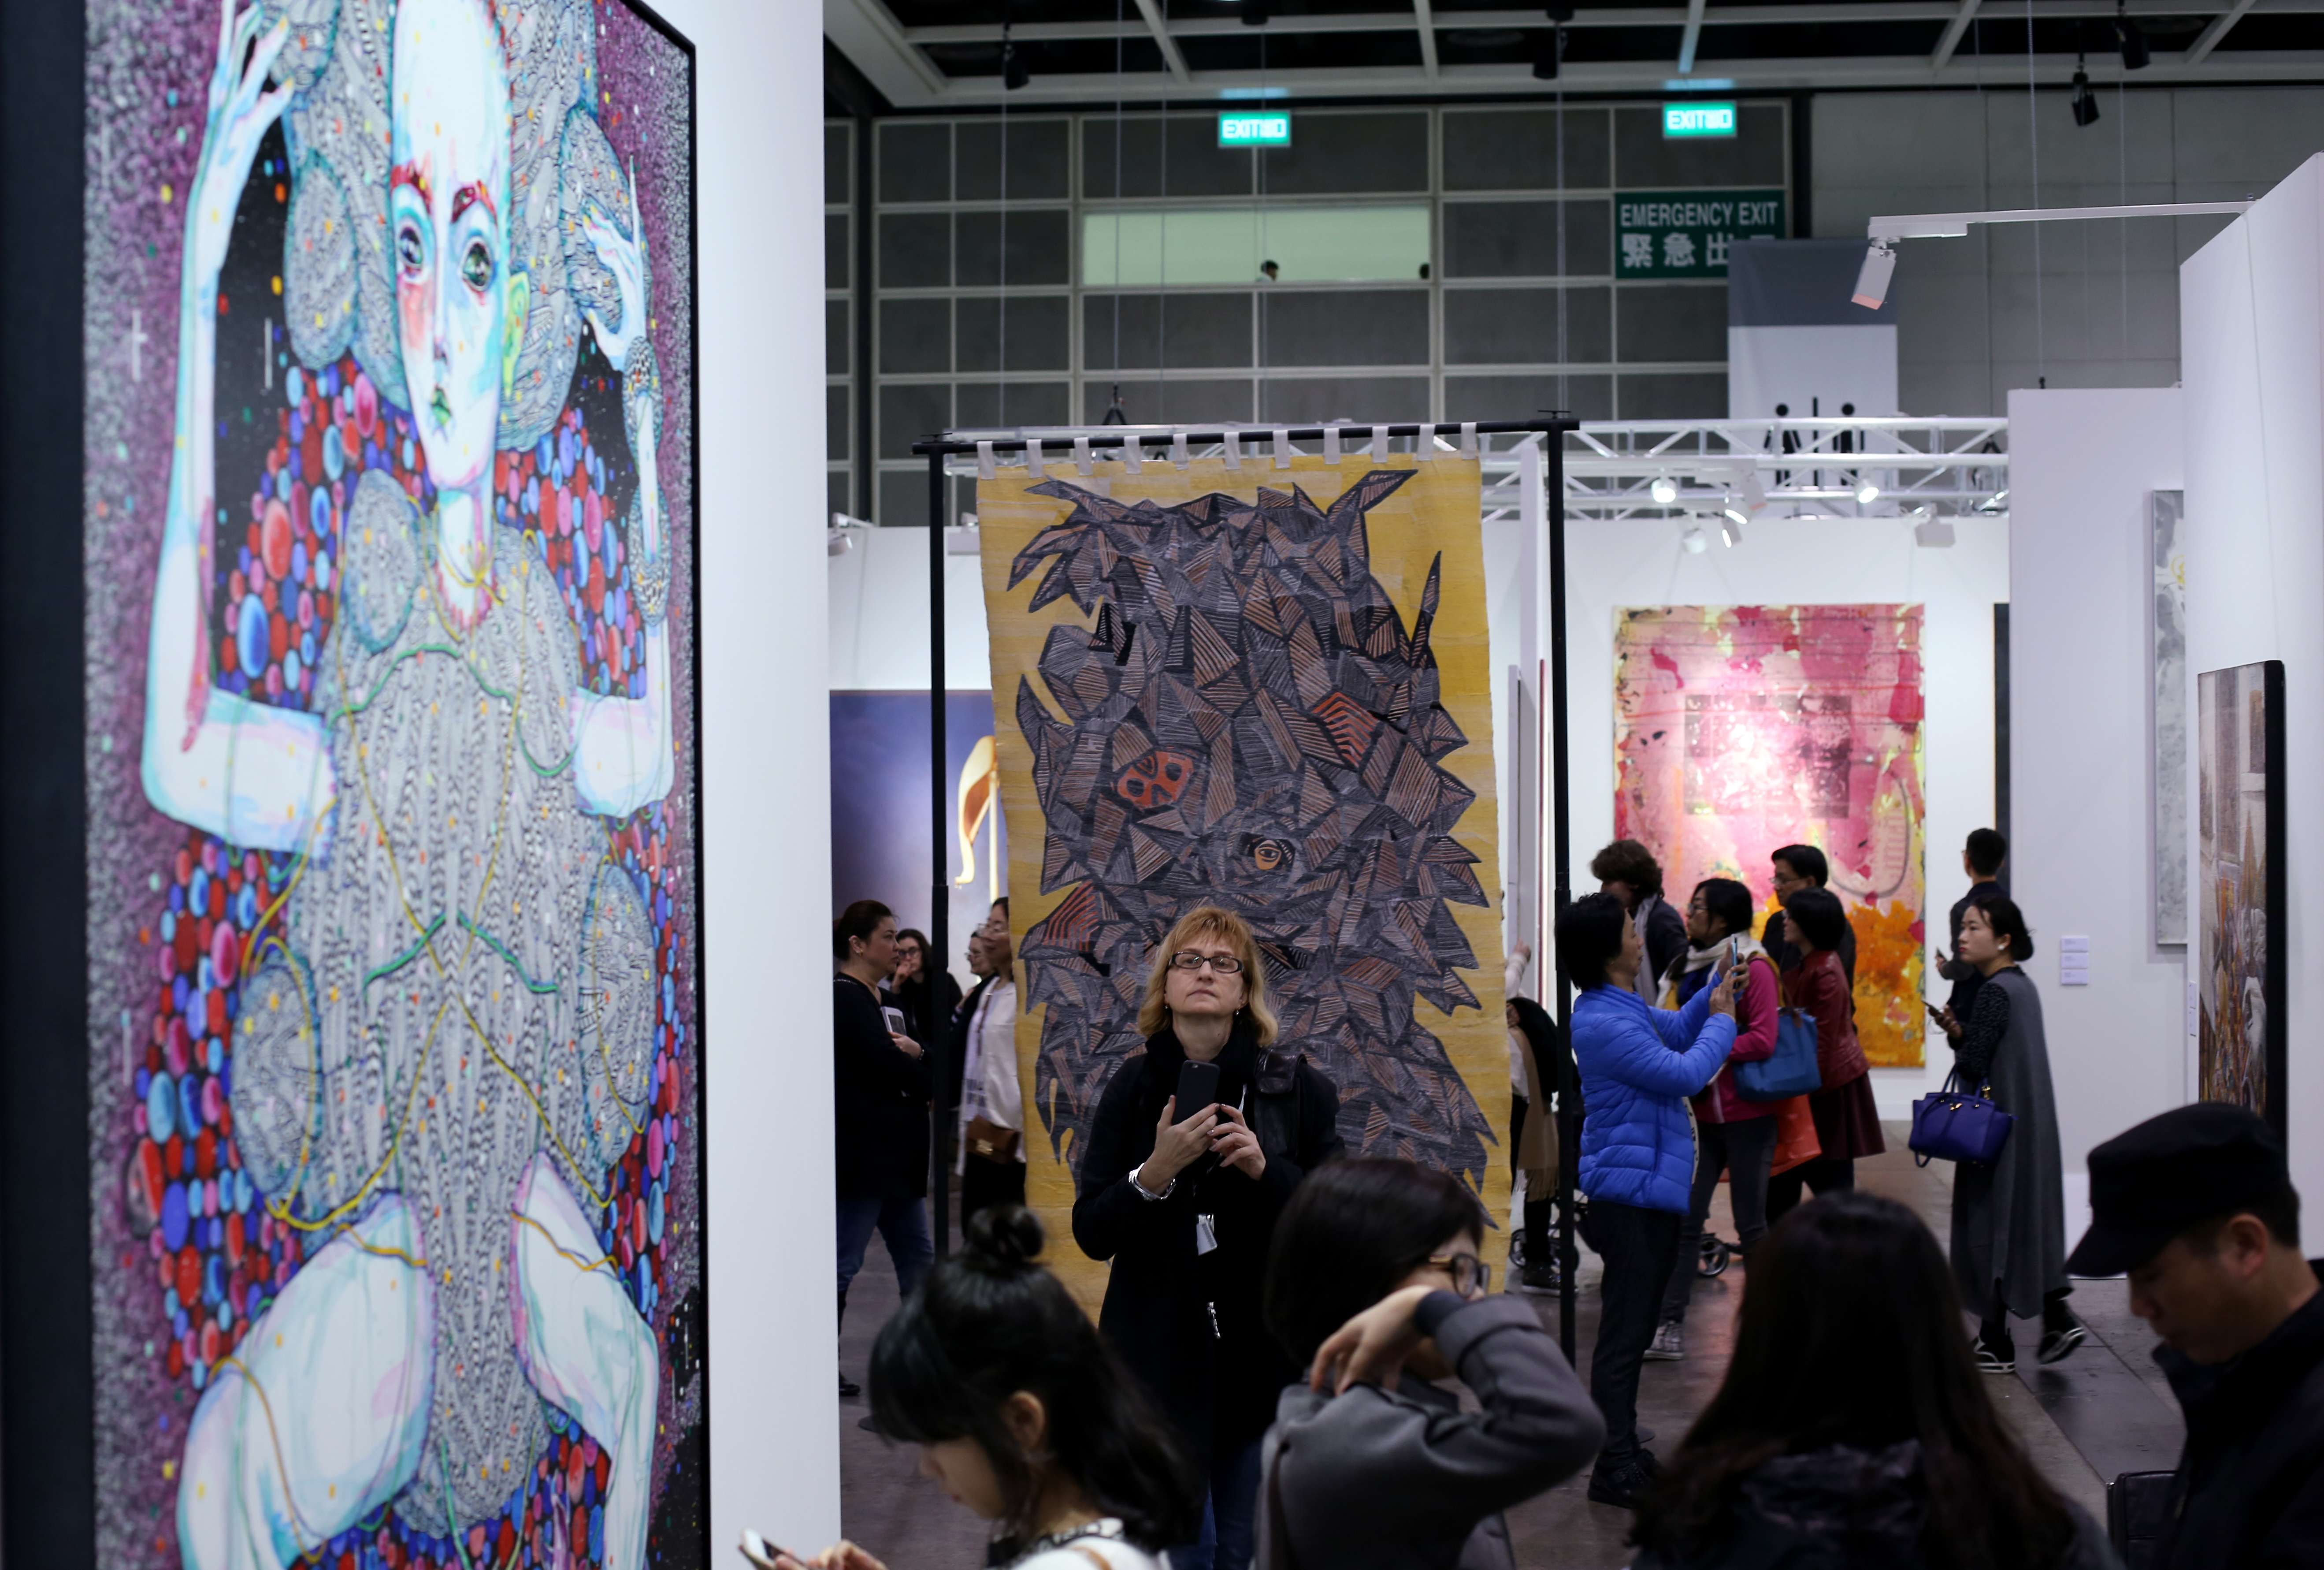 With more art bought through private sale than at auction in 2016, there could be a lot of action at art fair, which opens to VIPs first, and at the scores of gallery exhibitions riding on its coattails